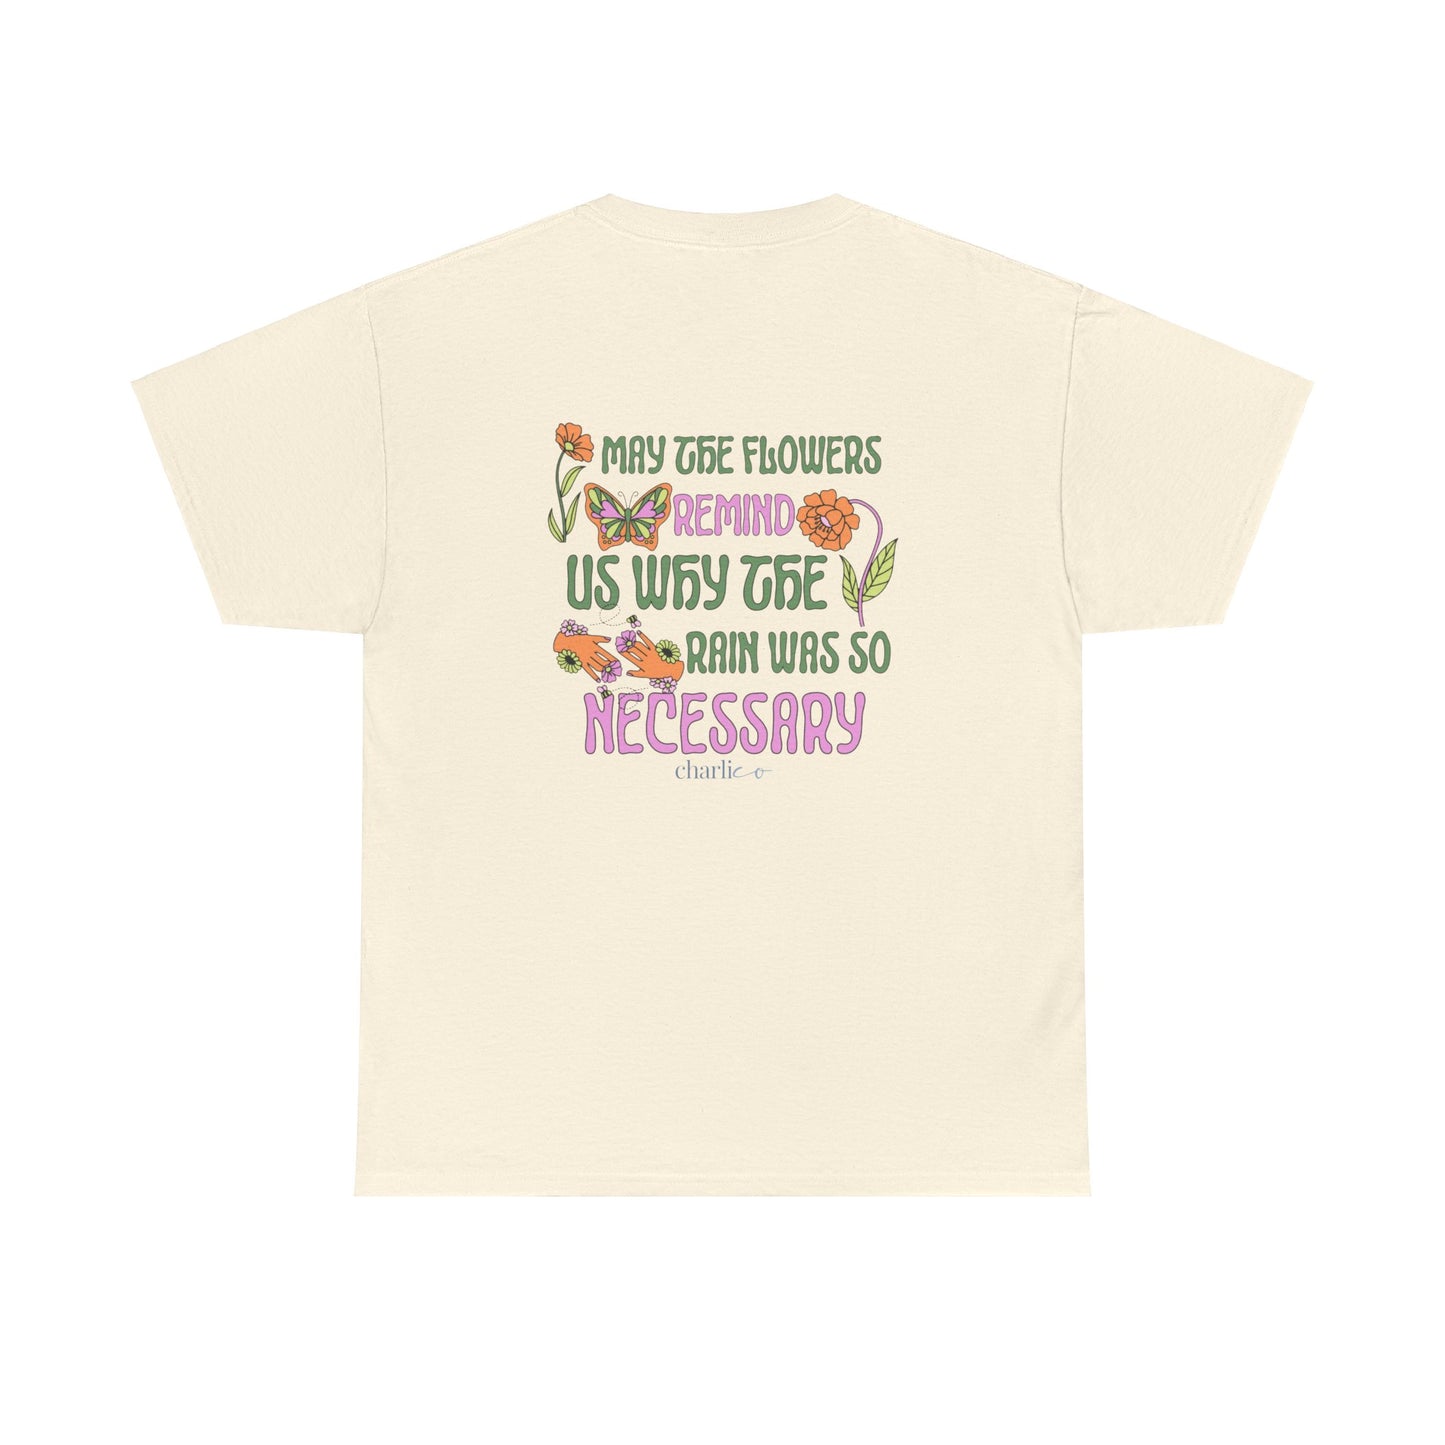 Short-sleeved t-shirt with unisex print -MAY THE FLOWERS- for adults